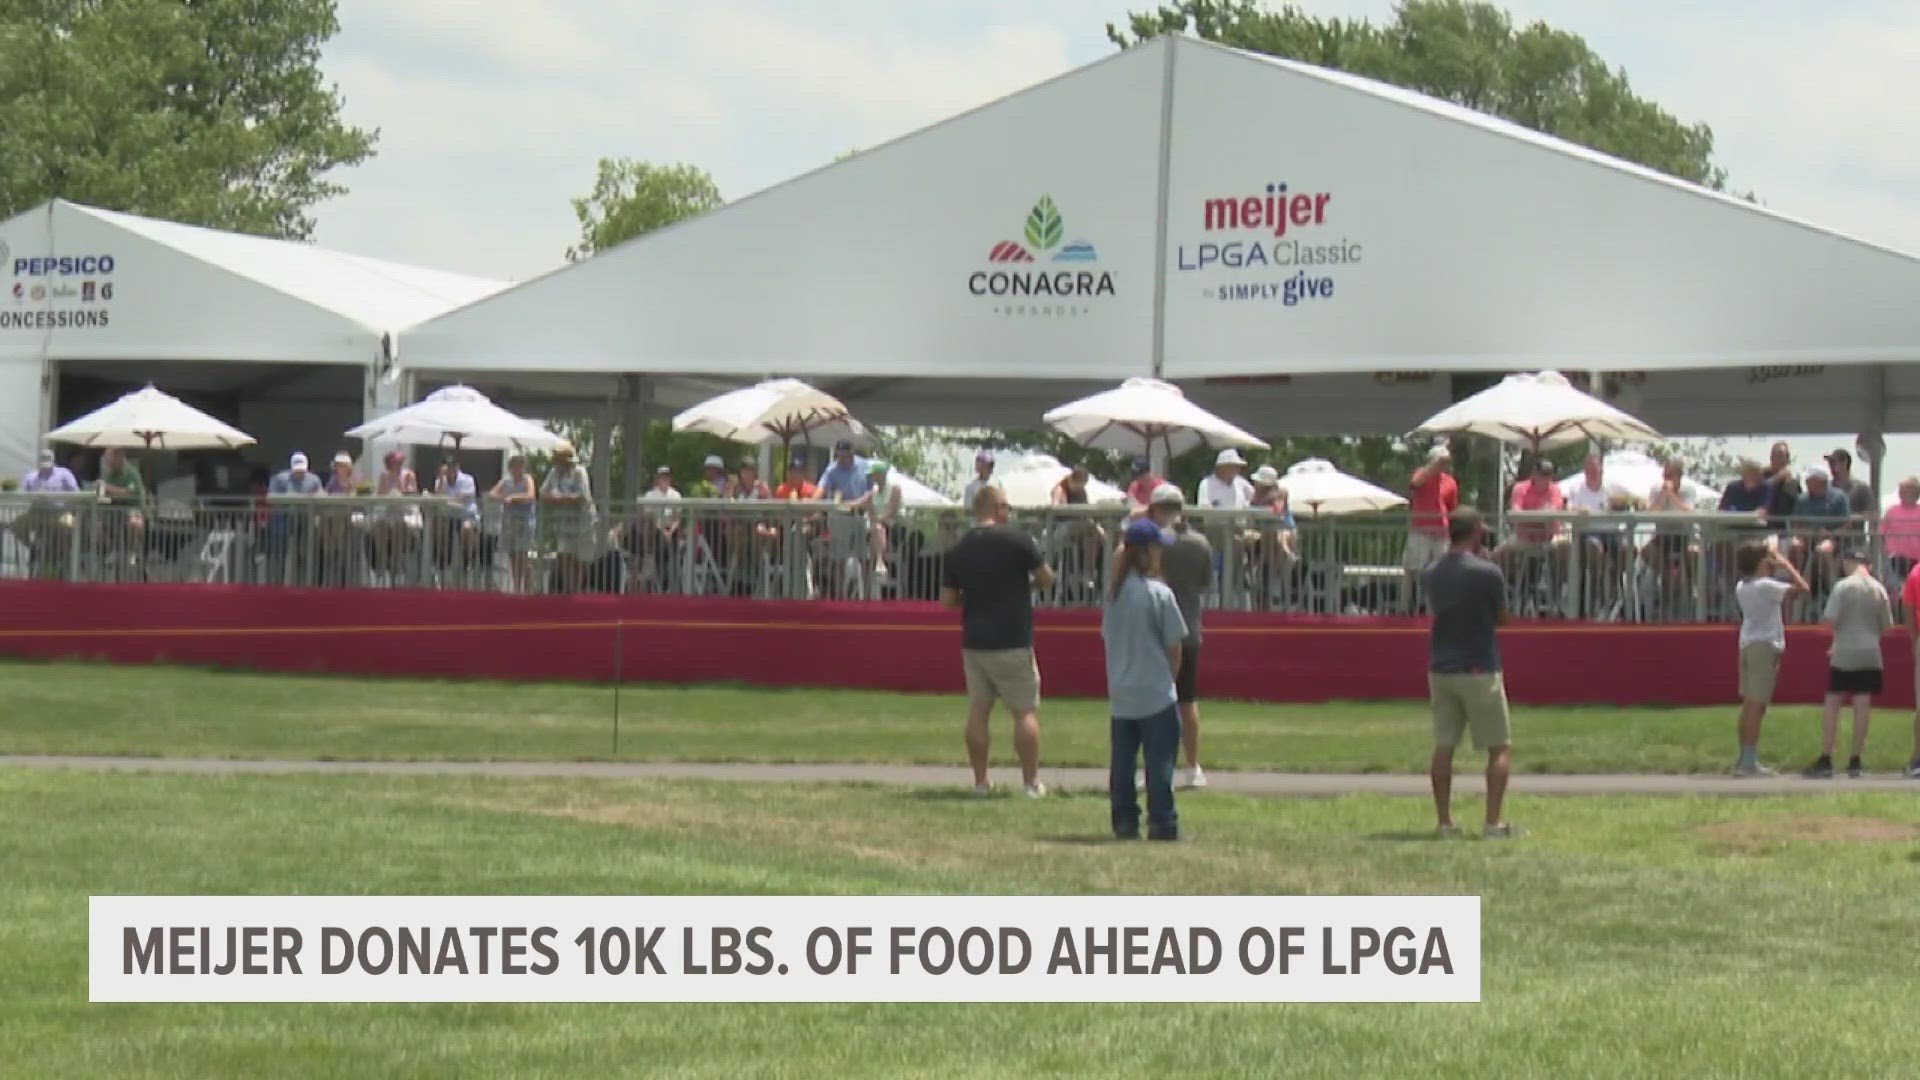 The annual event raises money and donations for Simply Give, benefitting food pantries across West Michigan.